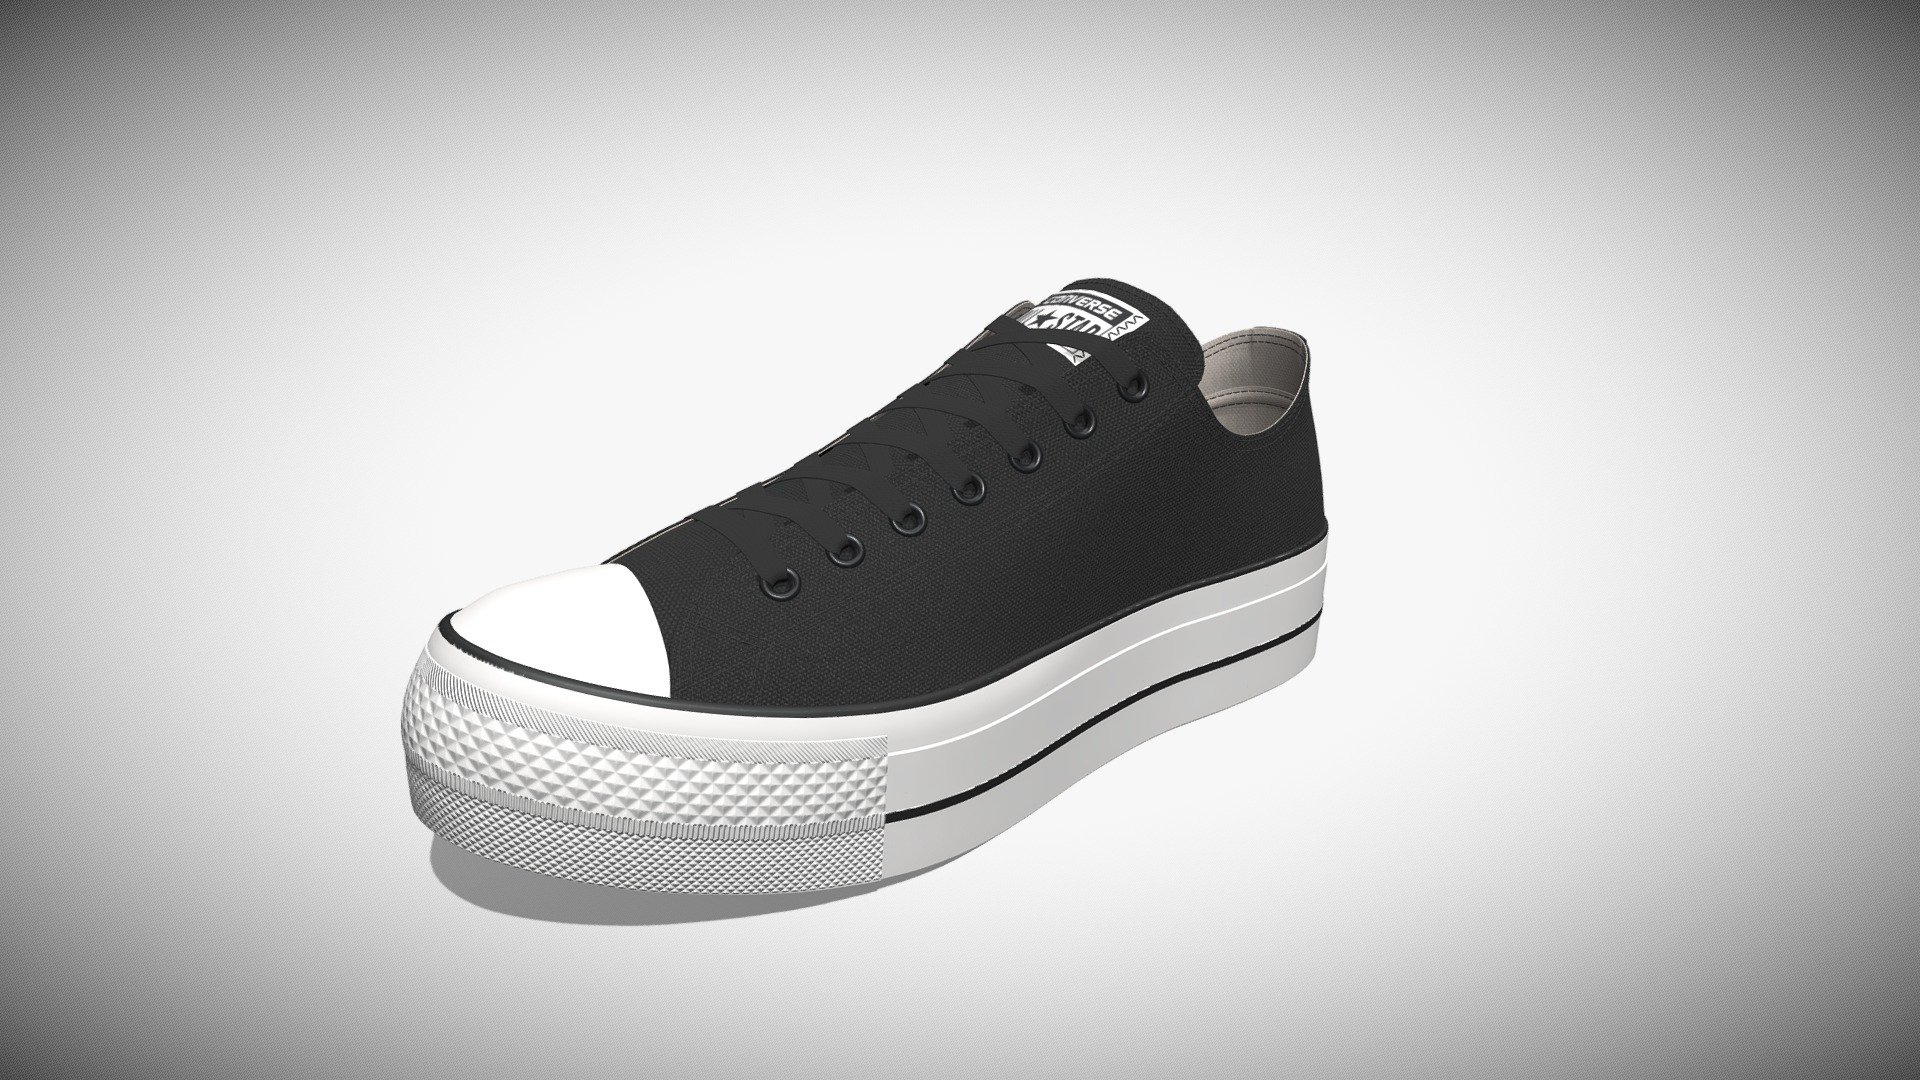 Detailed 3D model of a pair of black Chuck Taylor All Star Lift Platform Low Top sneakers, modeled in Cinema 4D. The model was created using approximate real world dimensions.

The model has 381,166 polys and 397,810 vertices.

An additional file has been provided containing the original Cinema 4D project file with both standard and v-ray materials, textures and other 3d format such as 3ds, fbx and obj. These files contain both the left and right pair of the shoes 3d model